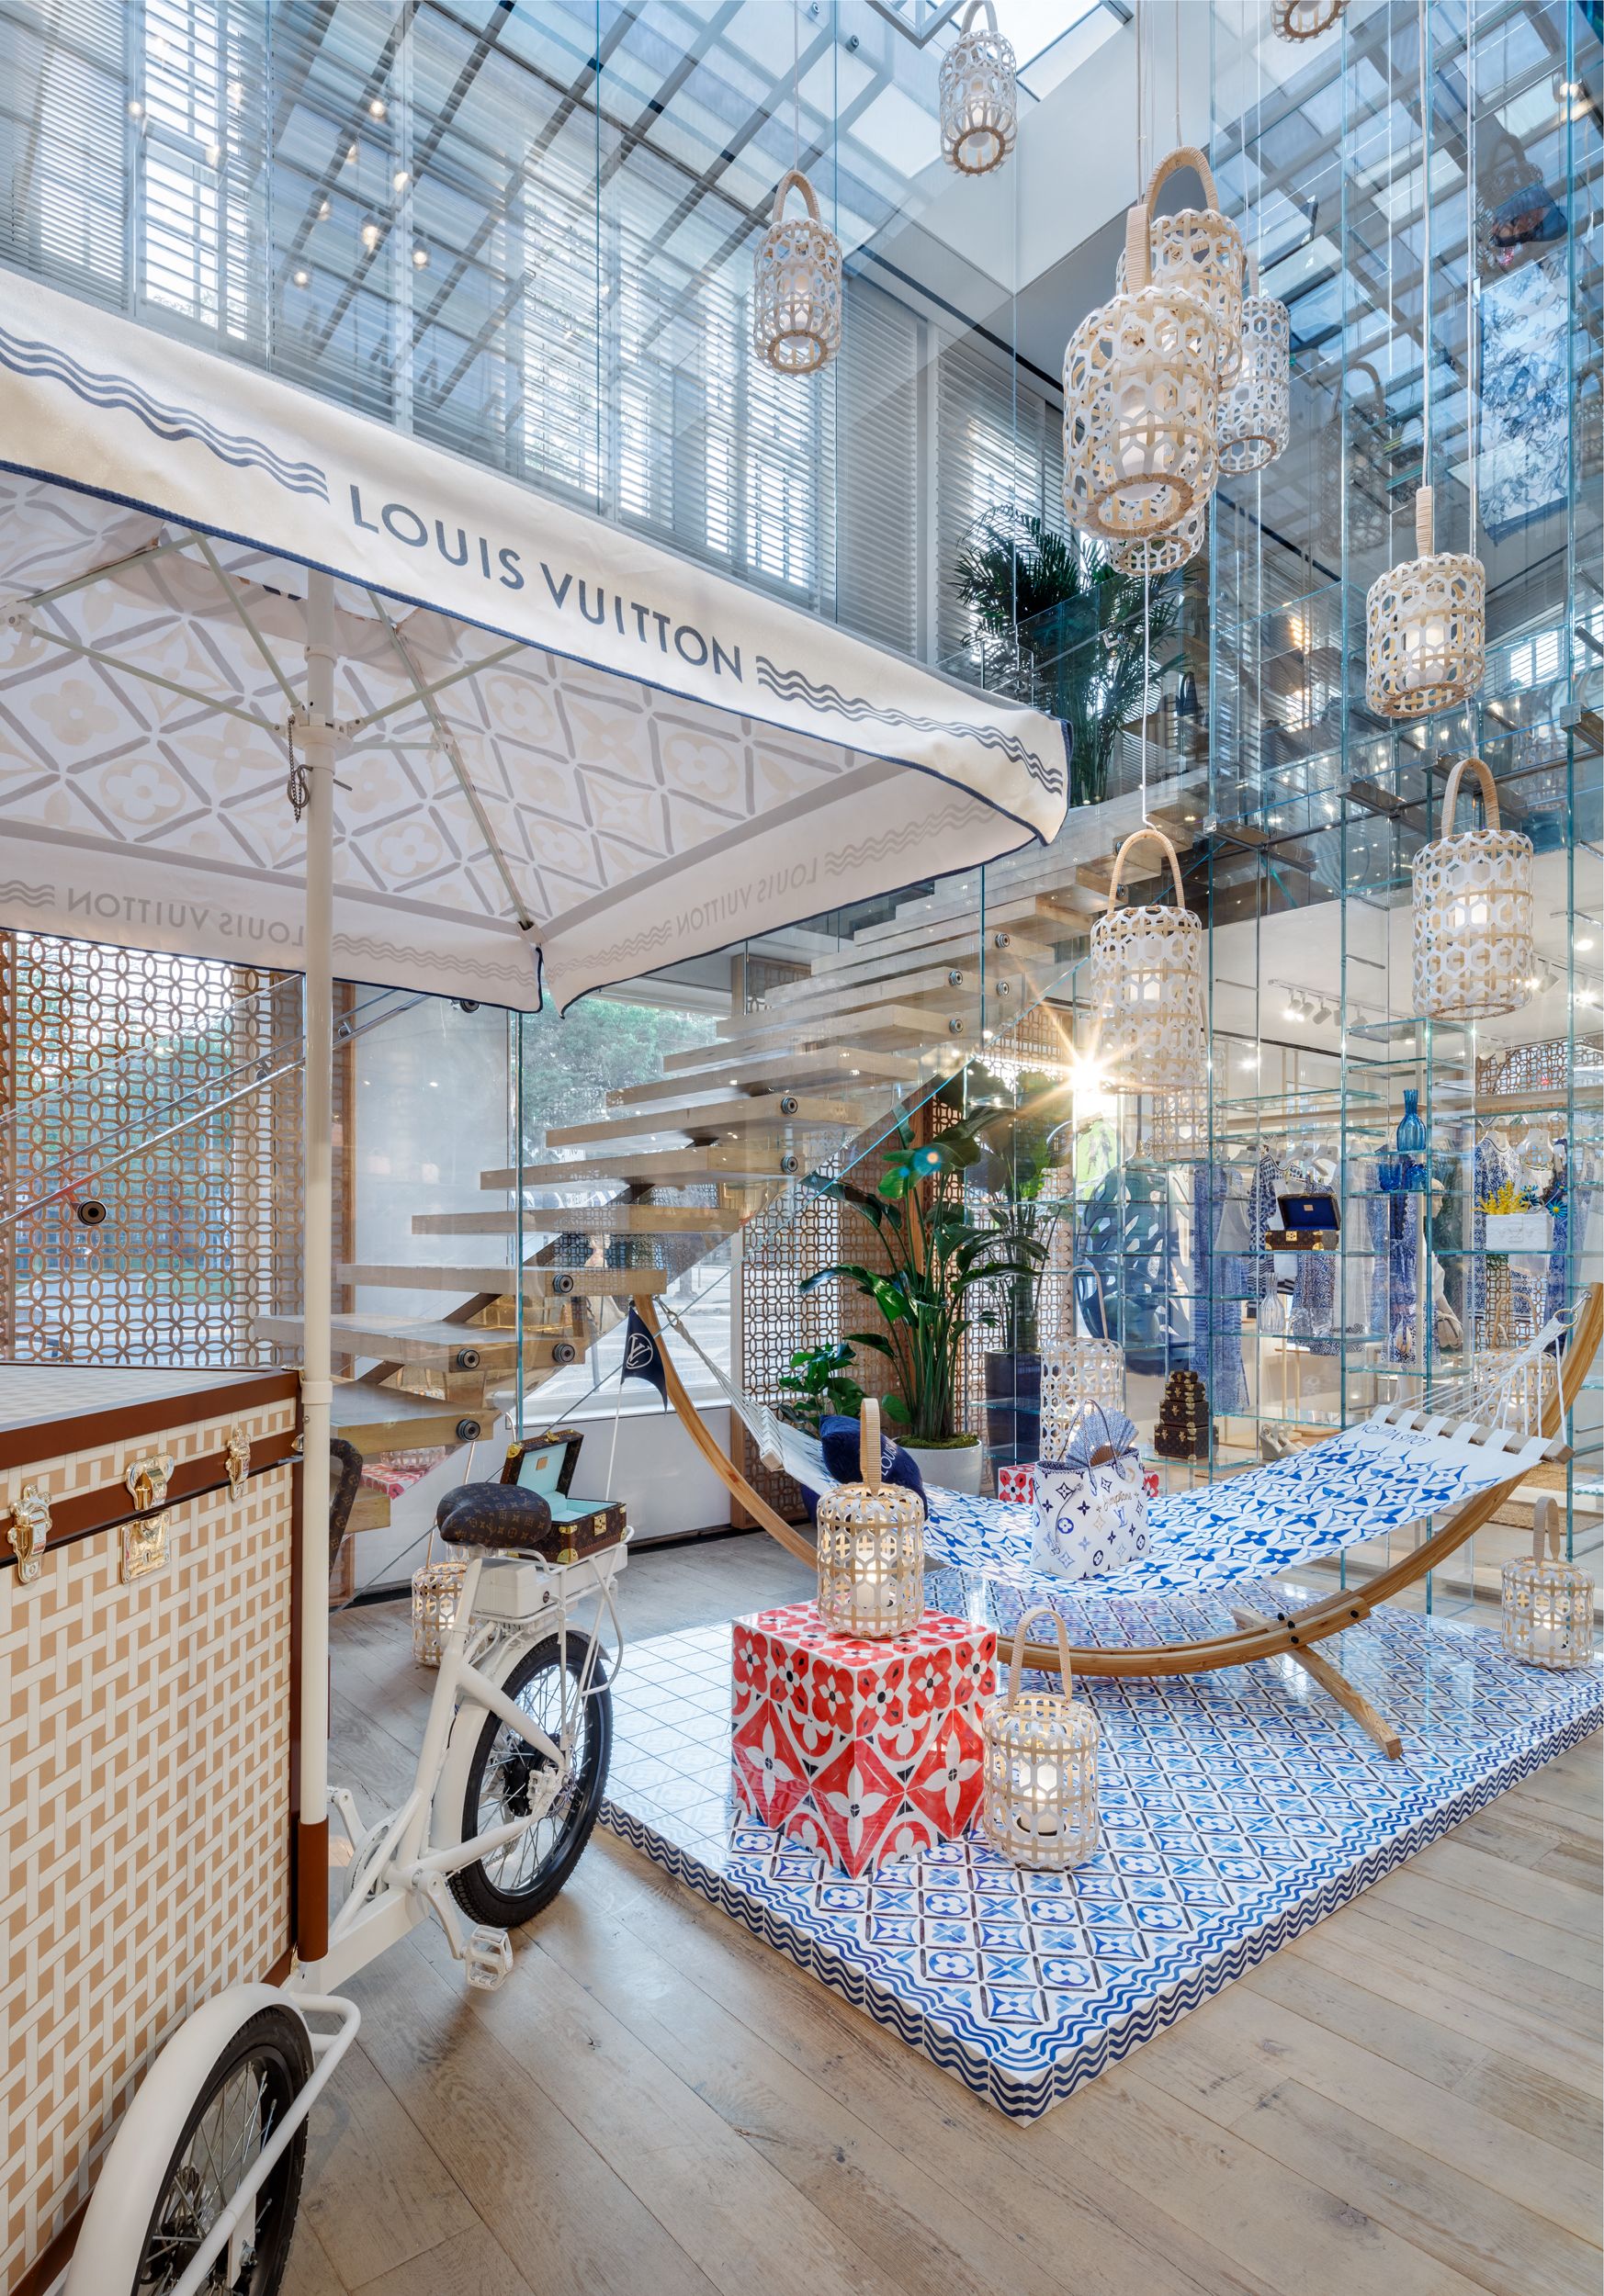 Louis Vuitton opening NYC pop-up store